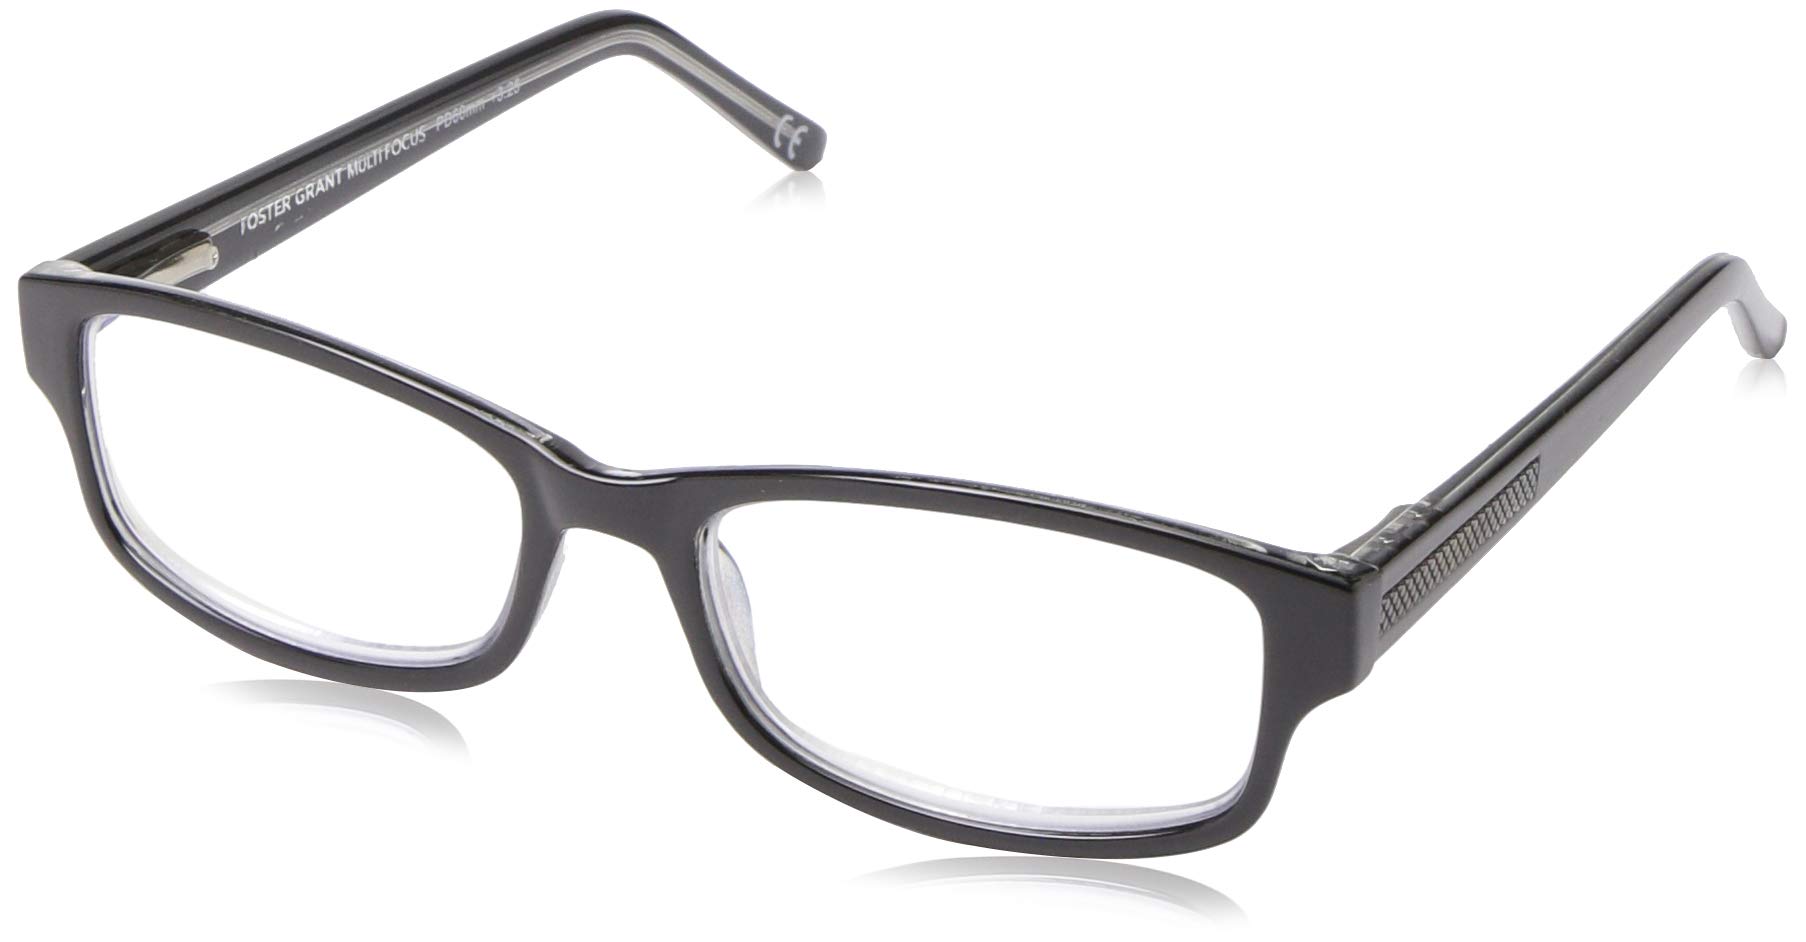 What Are the Main Features of Multi Focus Reading Glasses